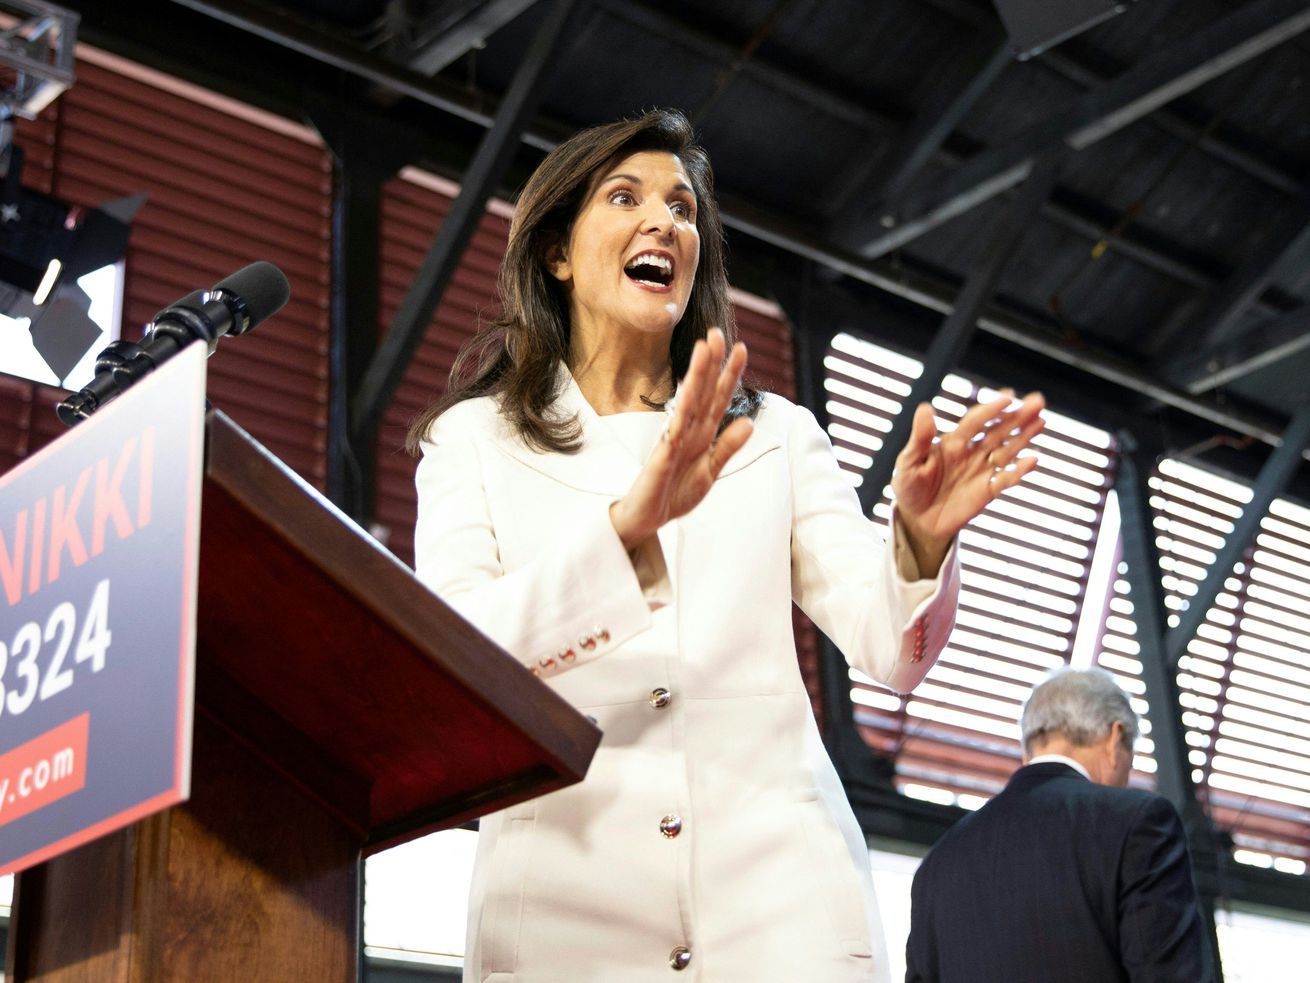 Nikki Haley gestures to someone off camera, standing in front of a lectern. 